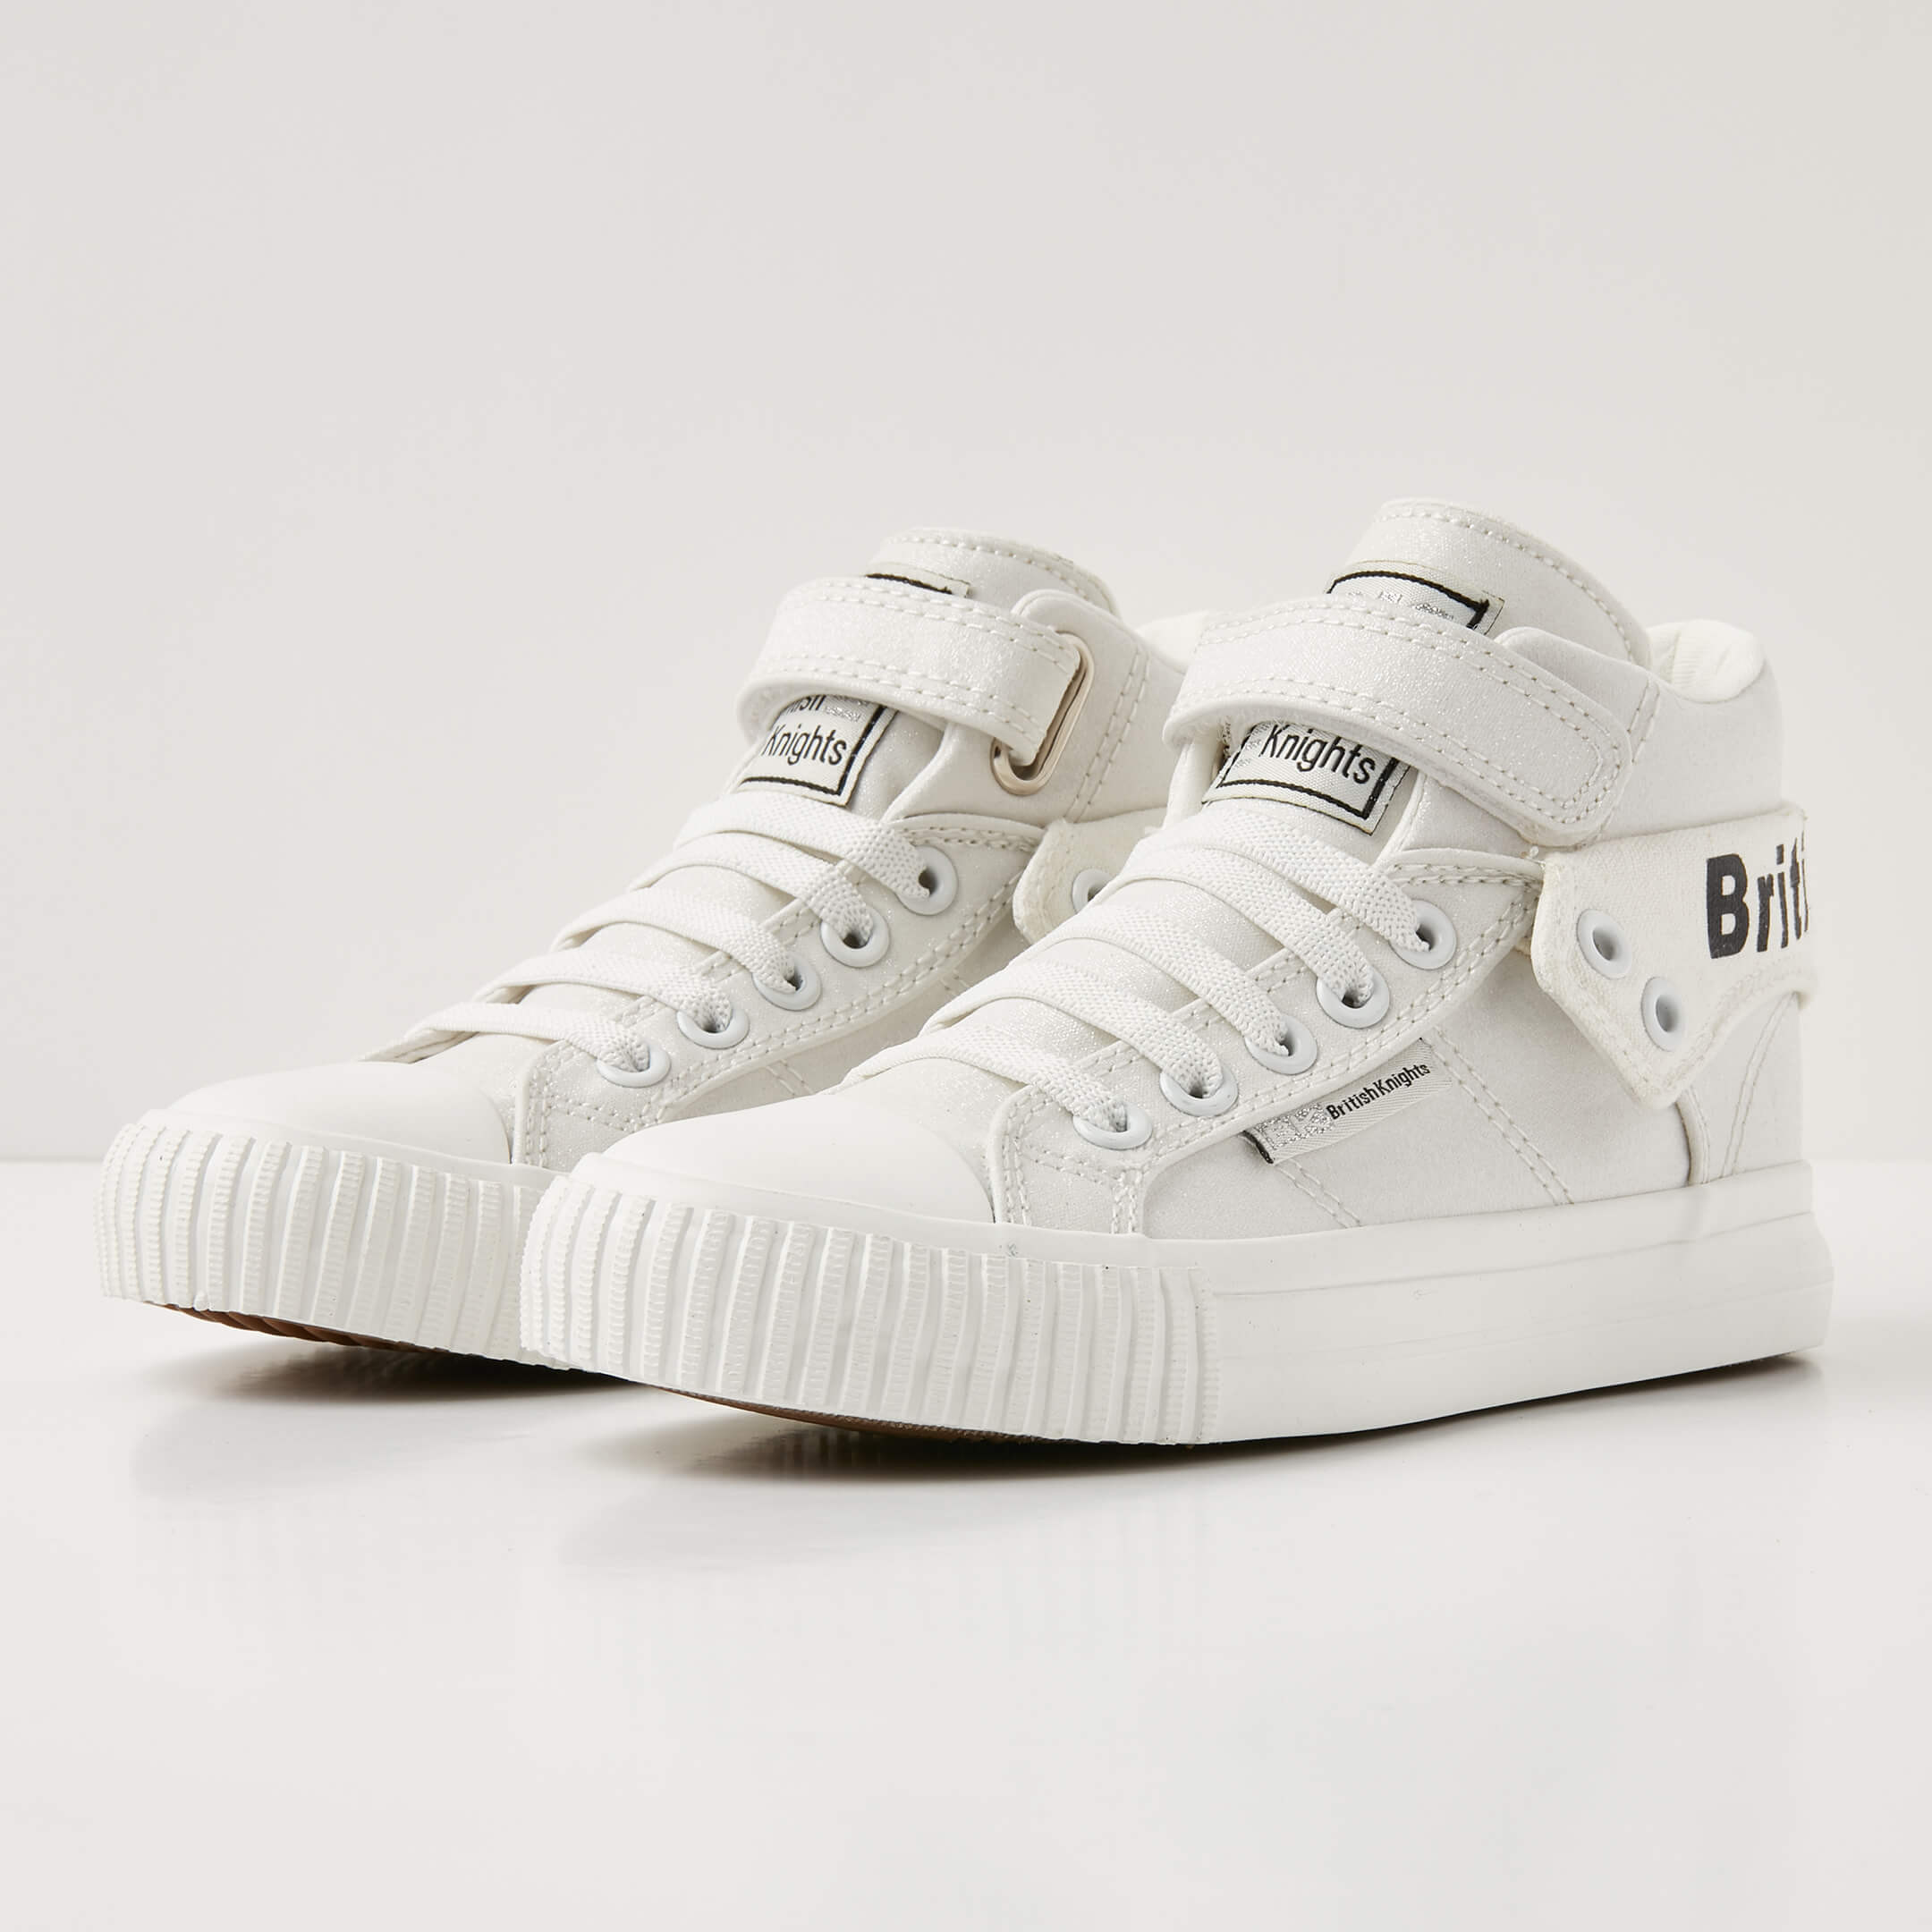 British Knights Sneaker Front view  B43-3703C-01 ROCO HIGH-TOP FEMALE